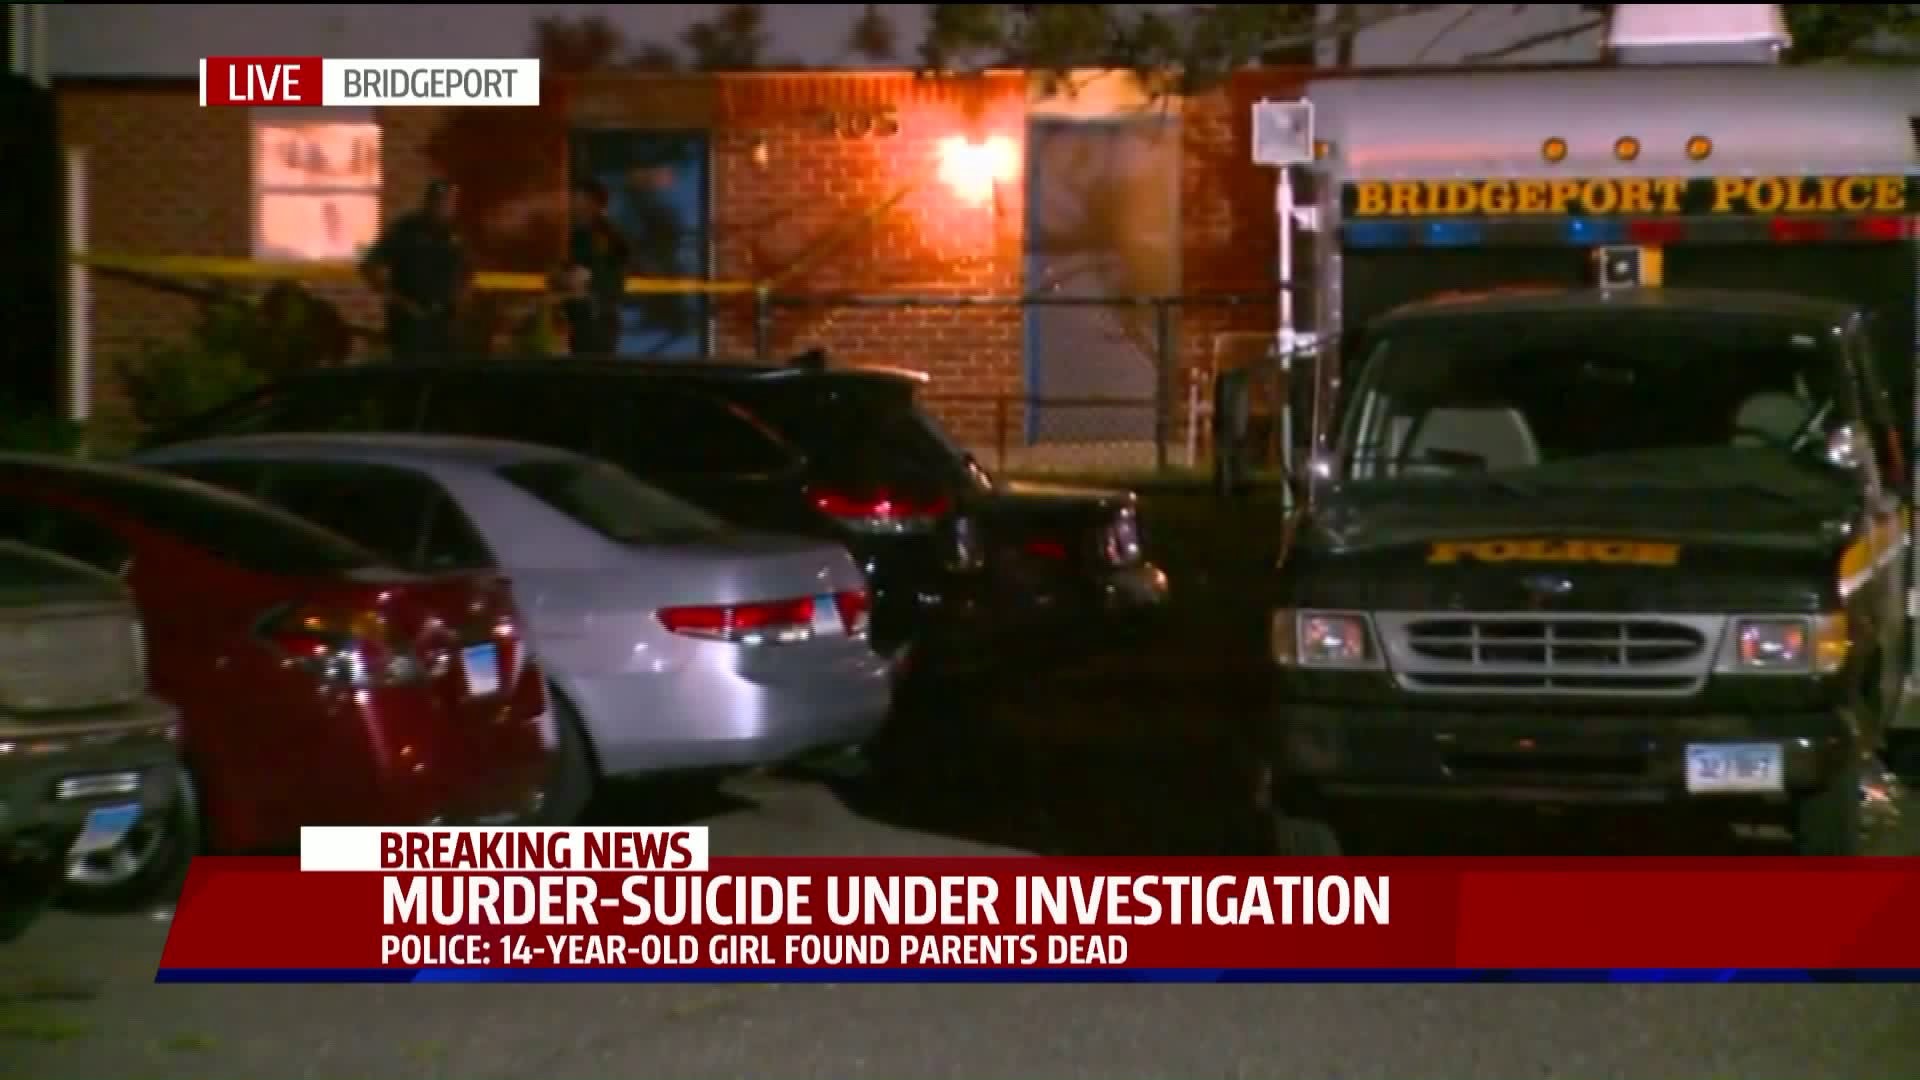 Domestic violence leads to murder-suicide in Bridgeport